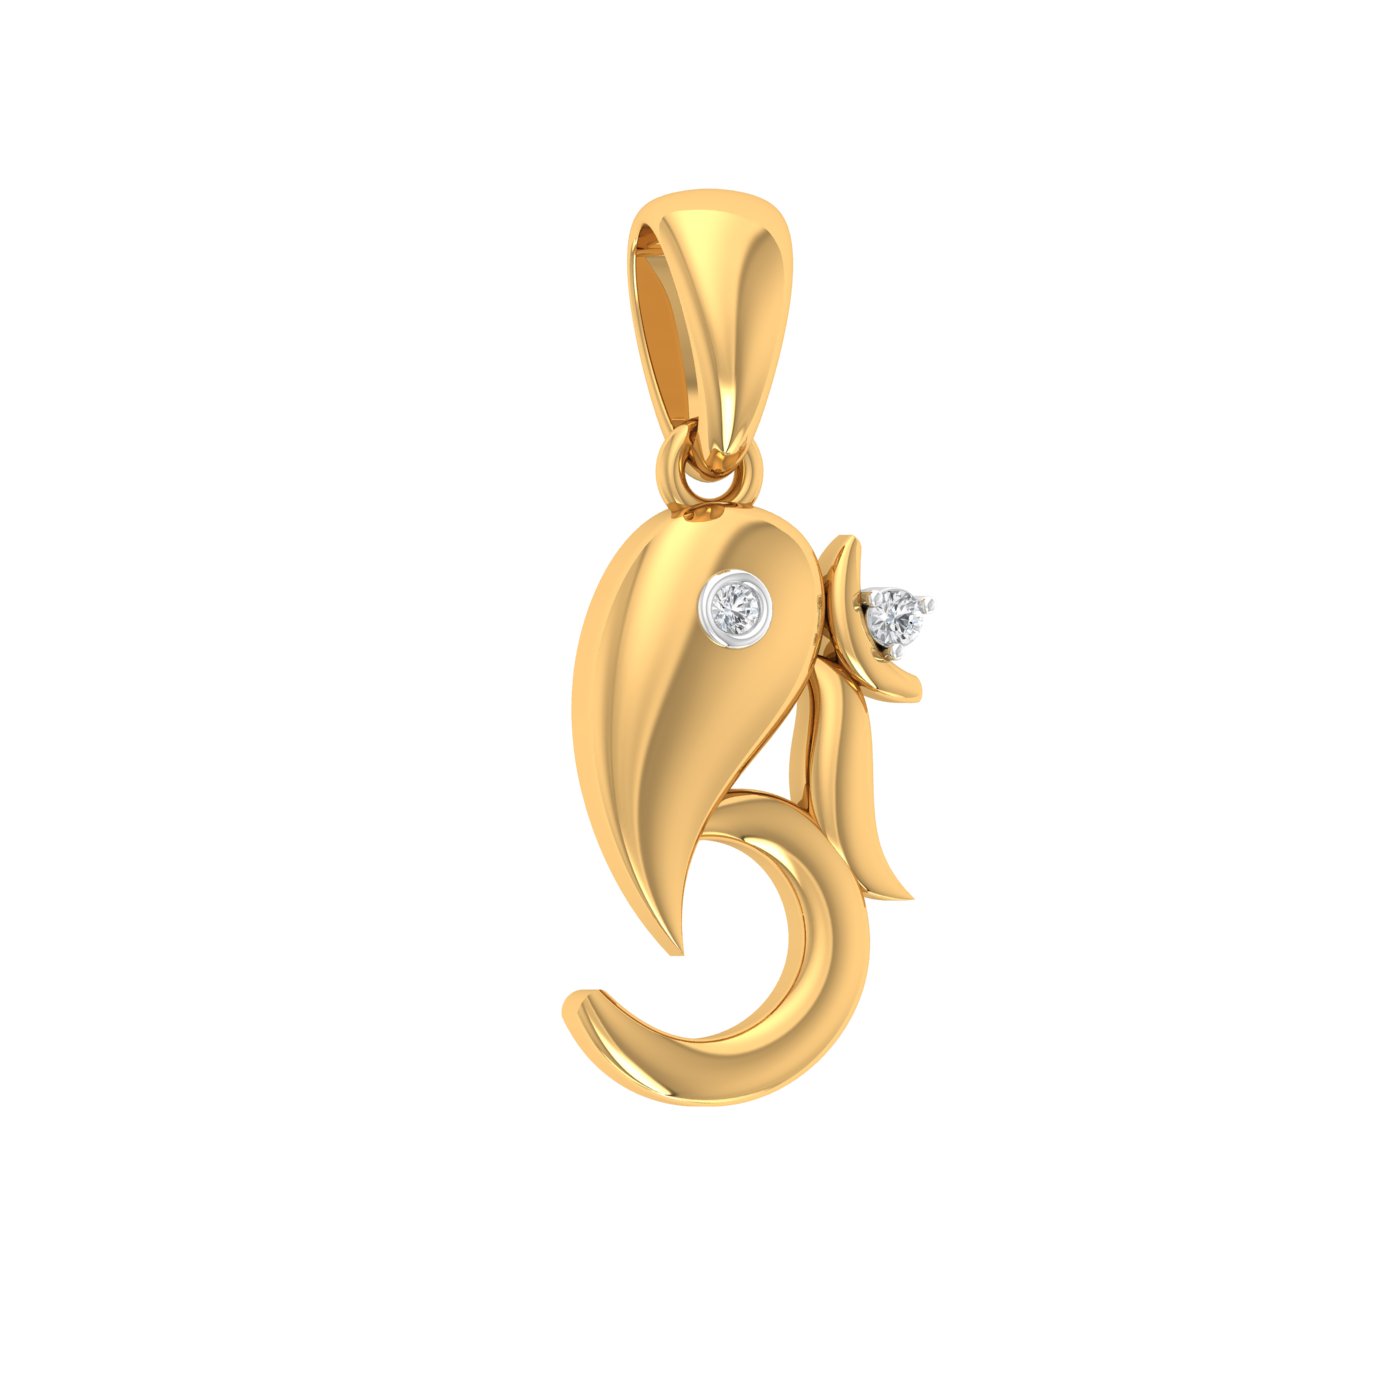 10 Exclusive Lord Ganesha Gold Pendant Designs | lightweight pendant | gift for him